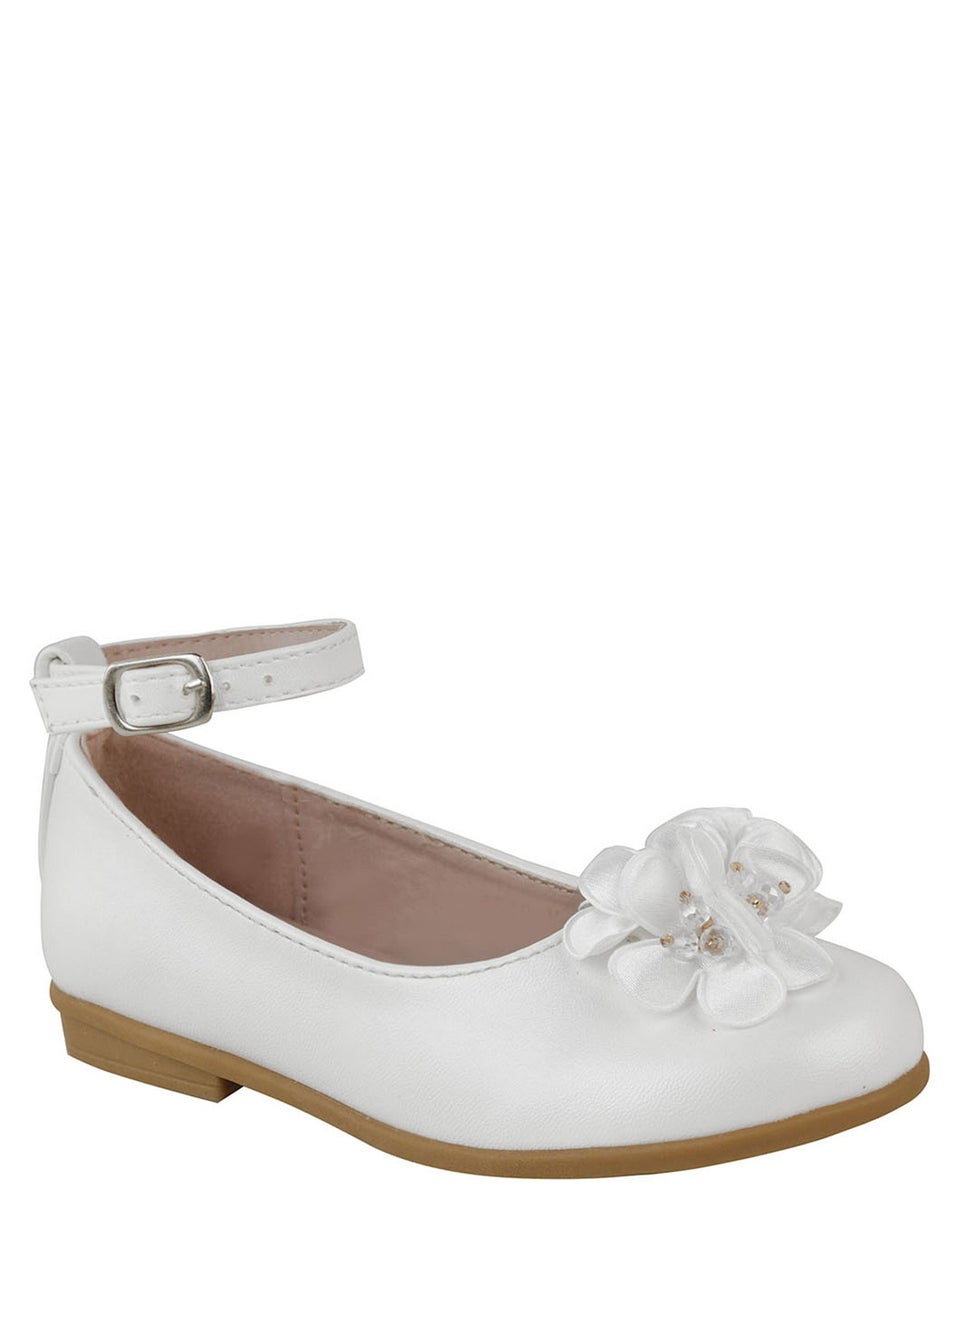 Where's That From  Kids White Lacen  Platform Flower Embellished Shoes